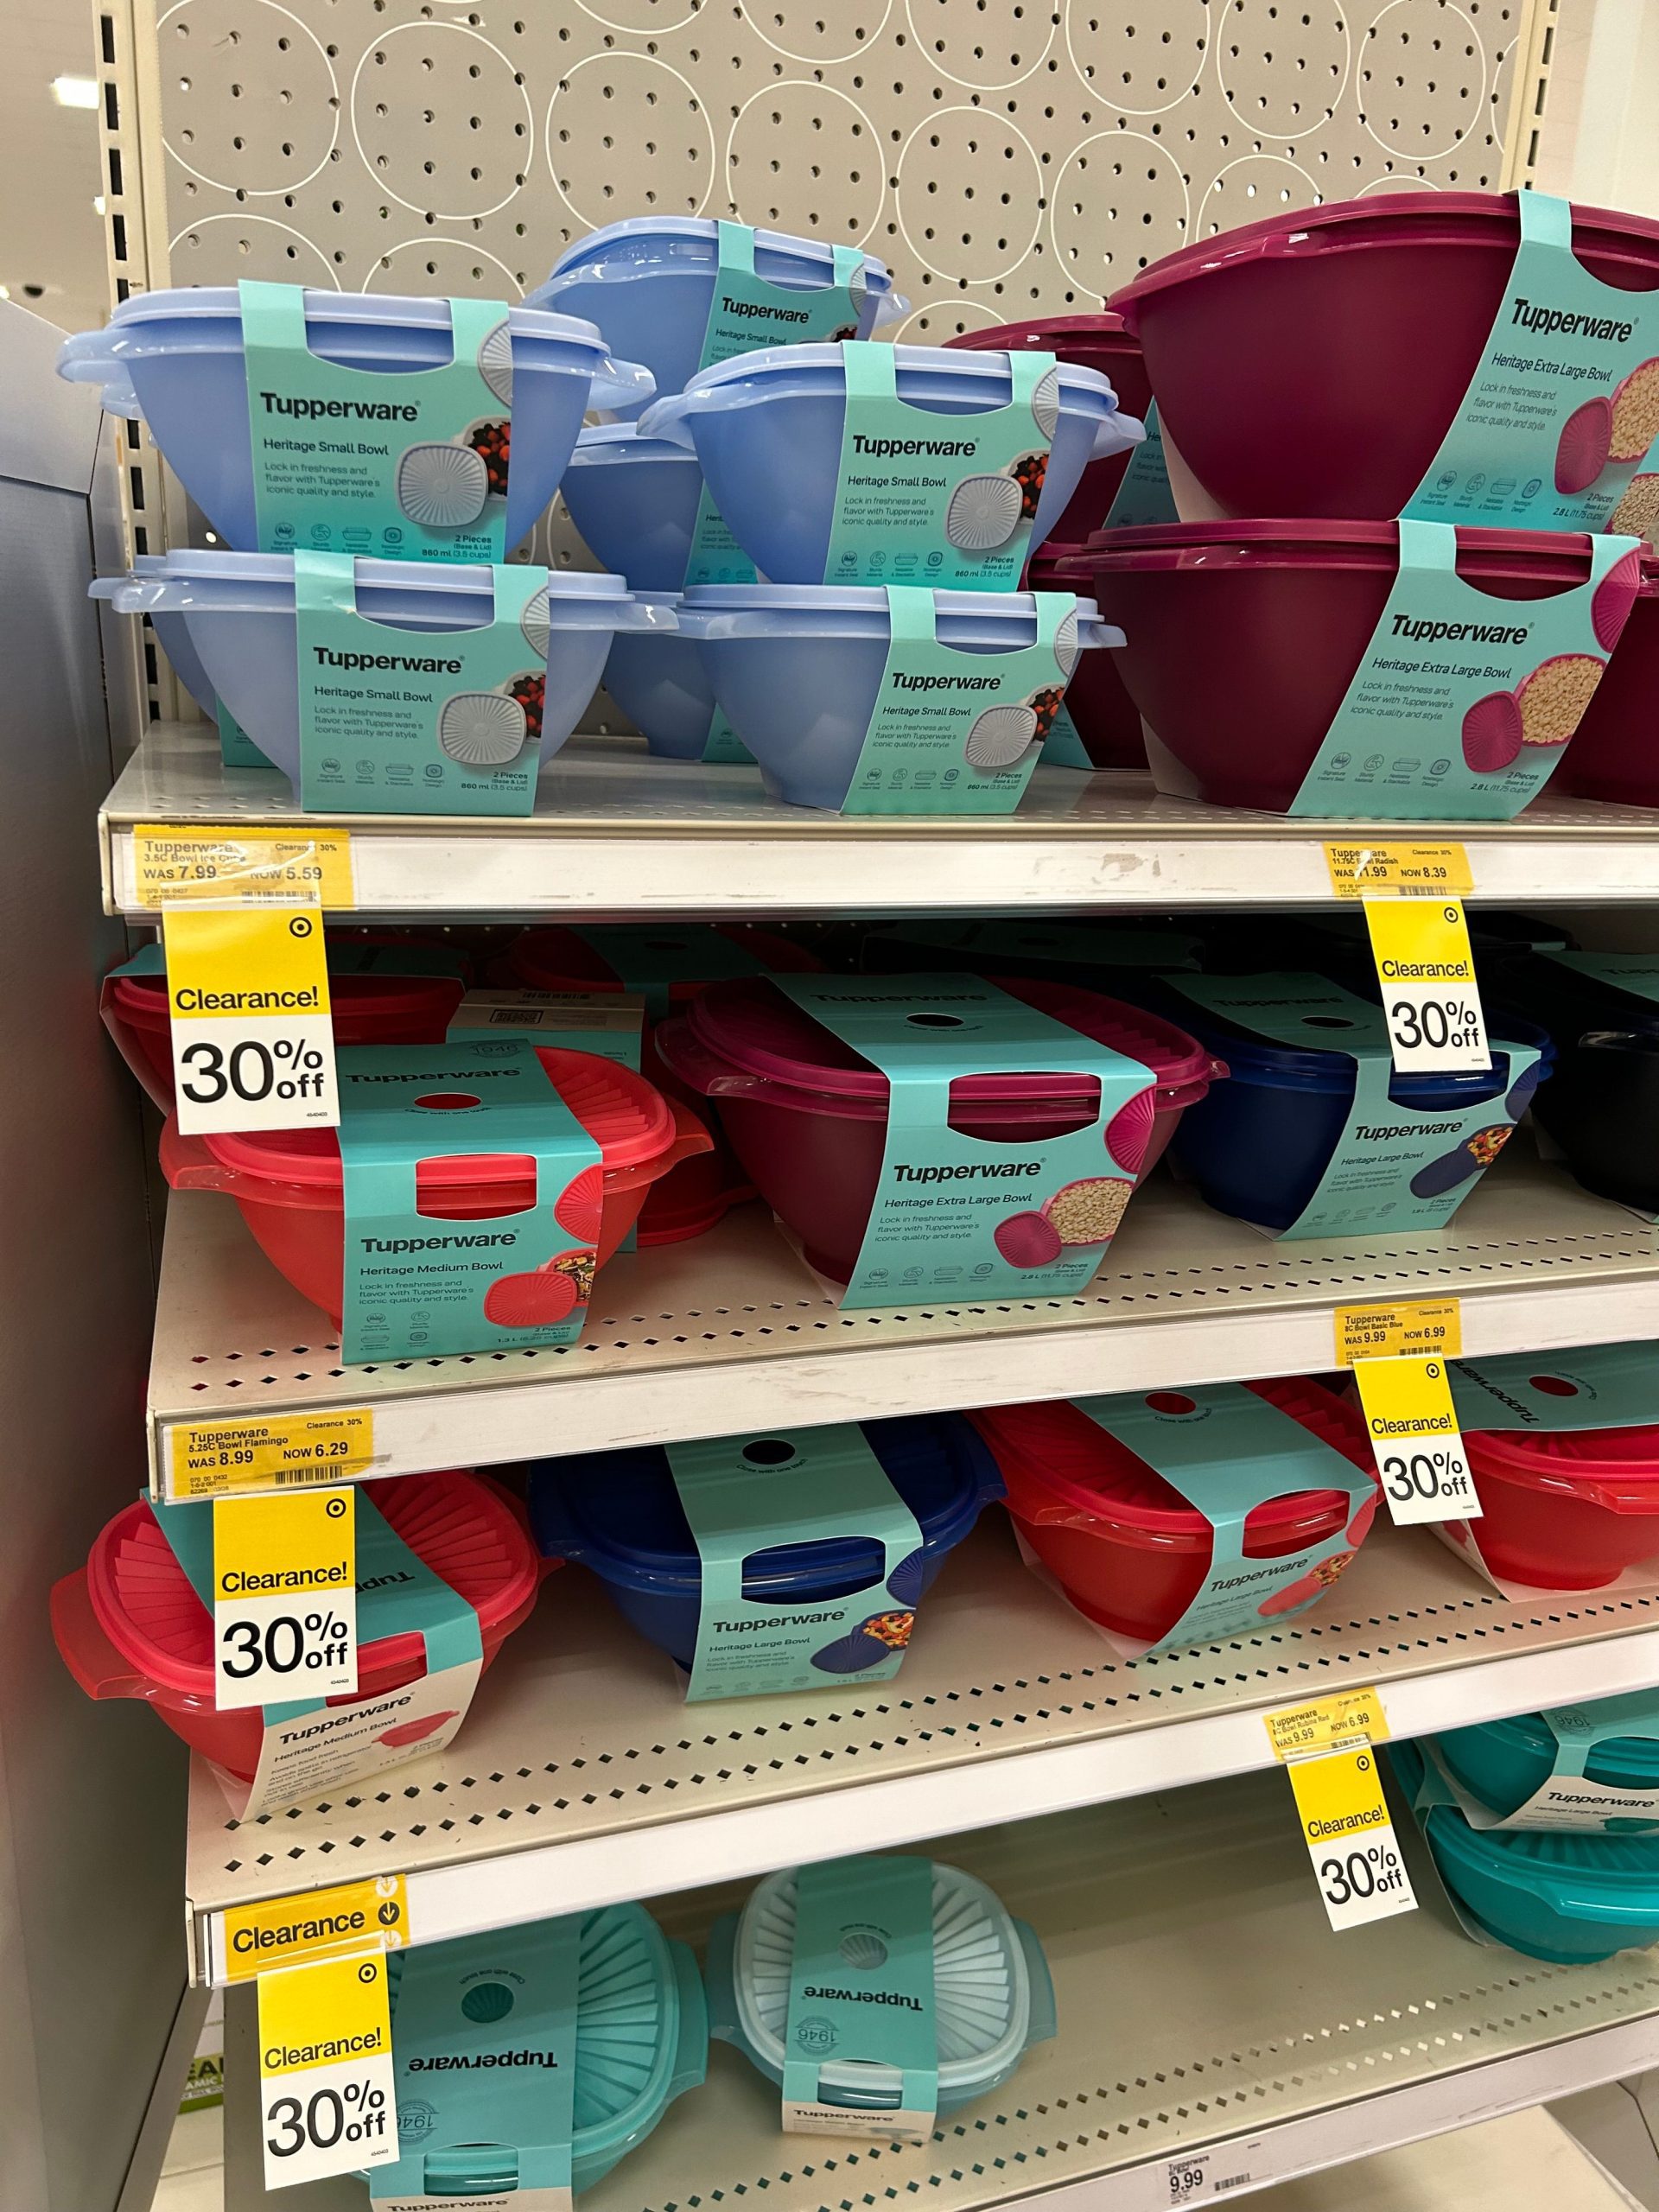 https://www.totallytarget.com/wp-content/uploads/2023/03/clearance-tupperware-scaled.jpeg